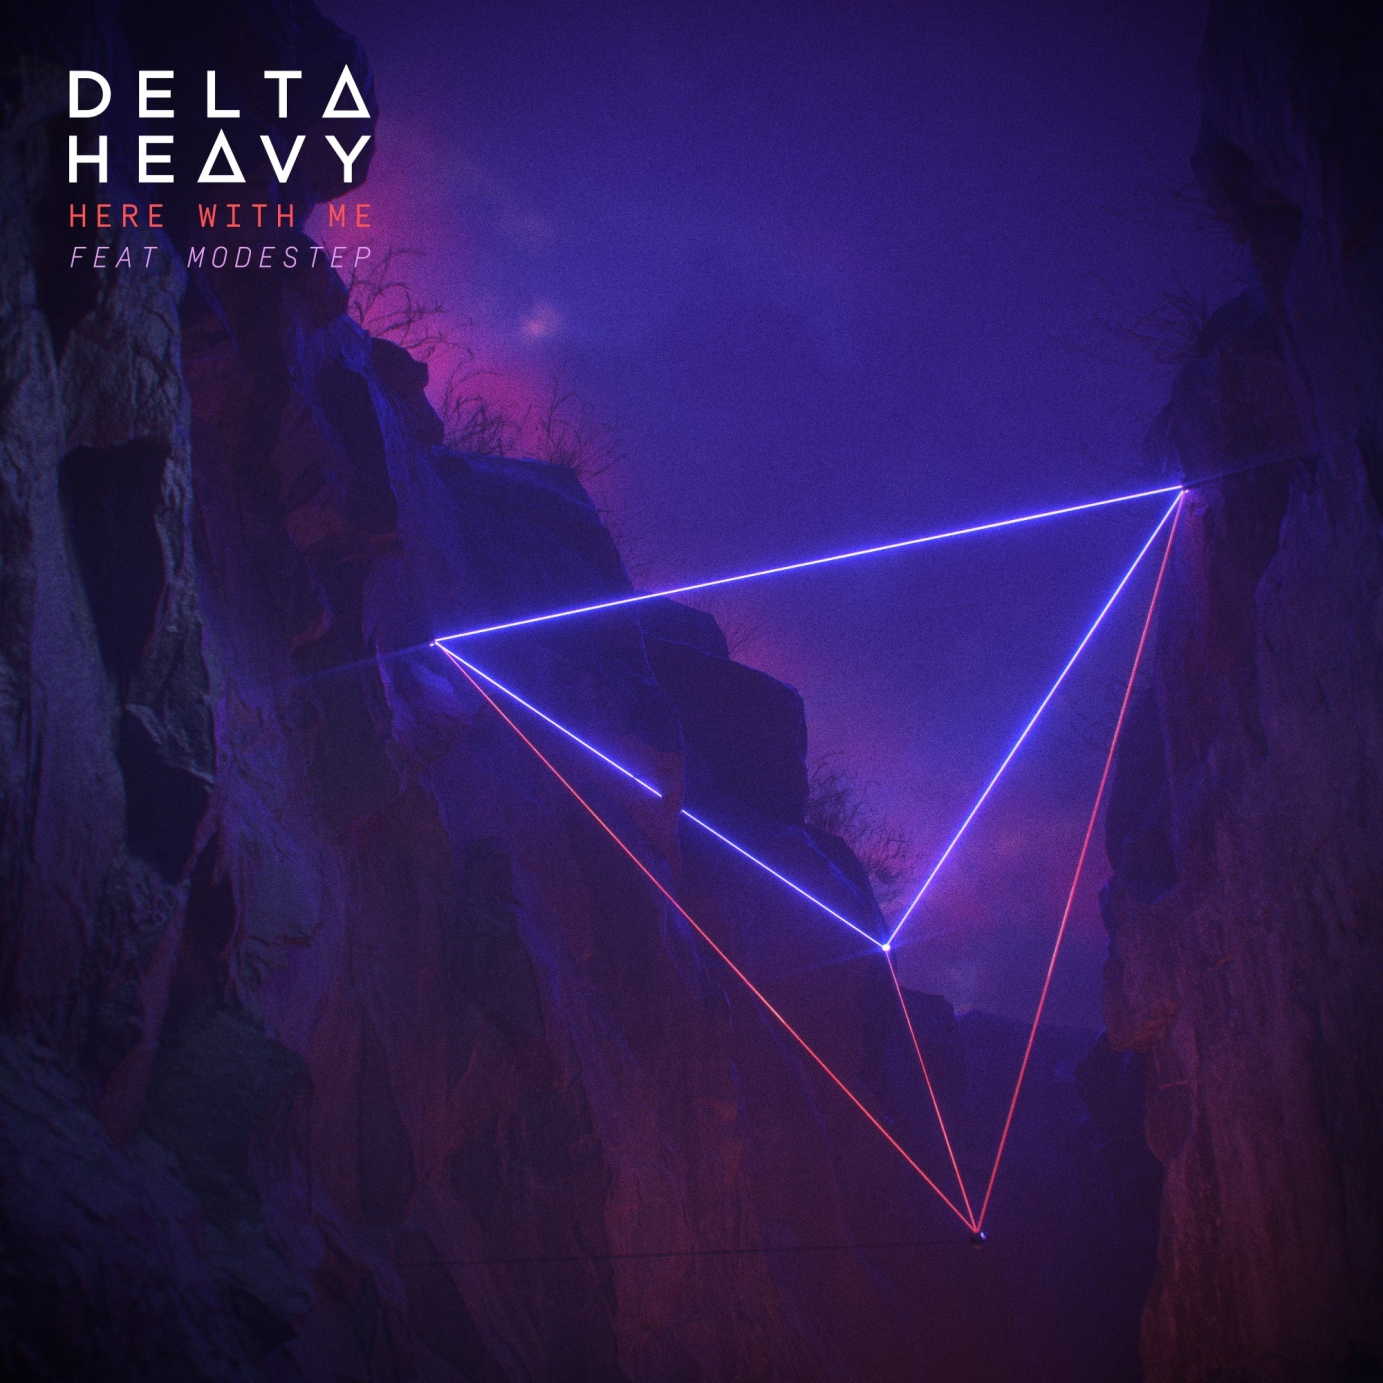 Artwork for Delta Heavy by cape_and_monocle